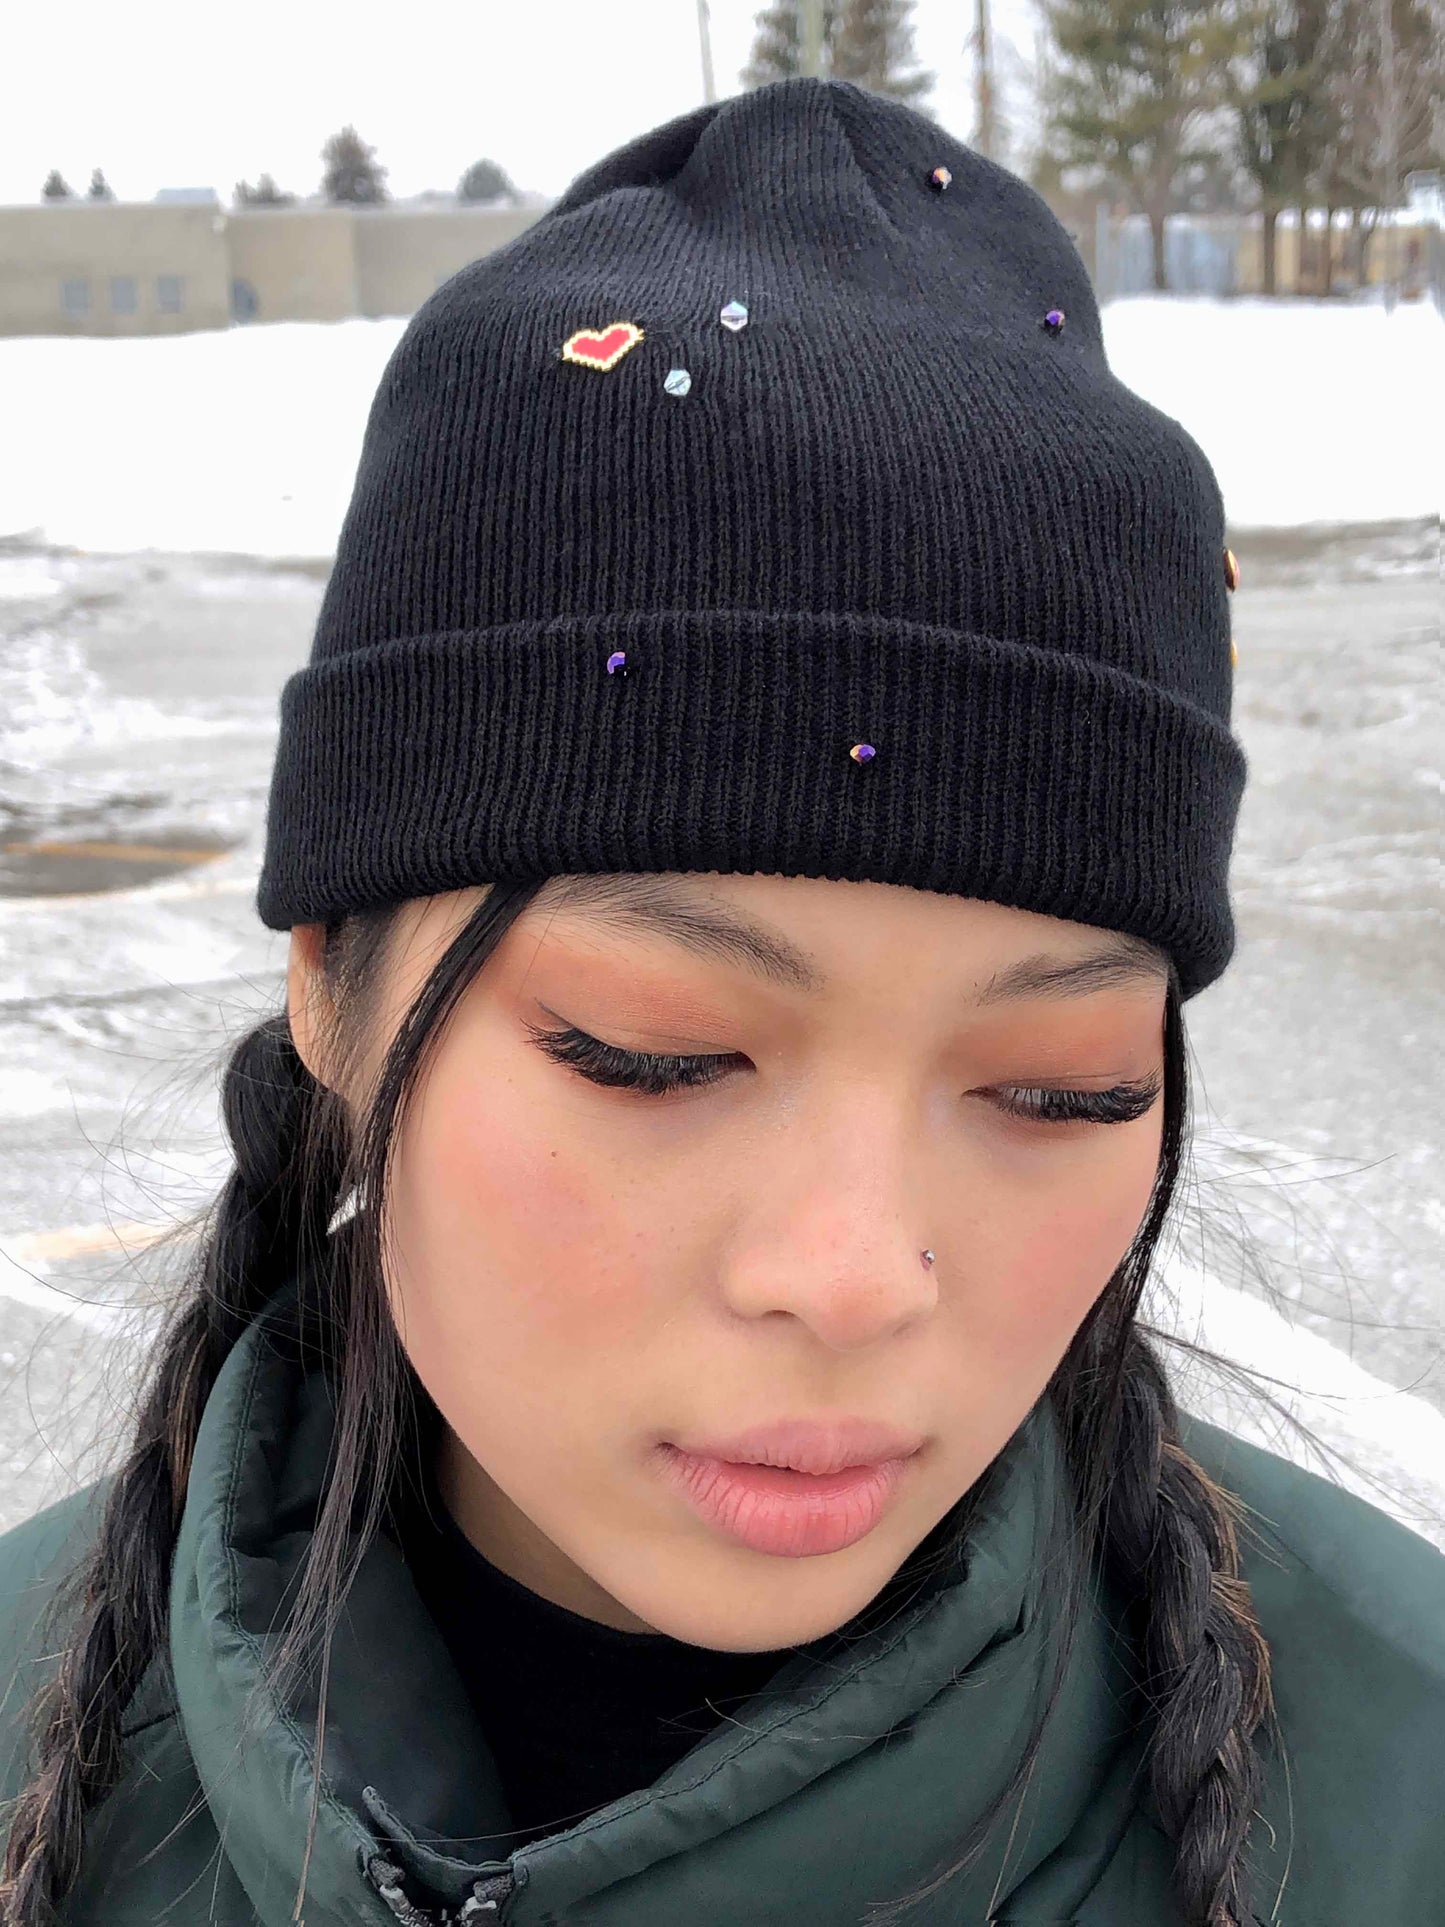 A black beanie accessorized using a heart charm and crystal beads.